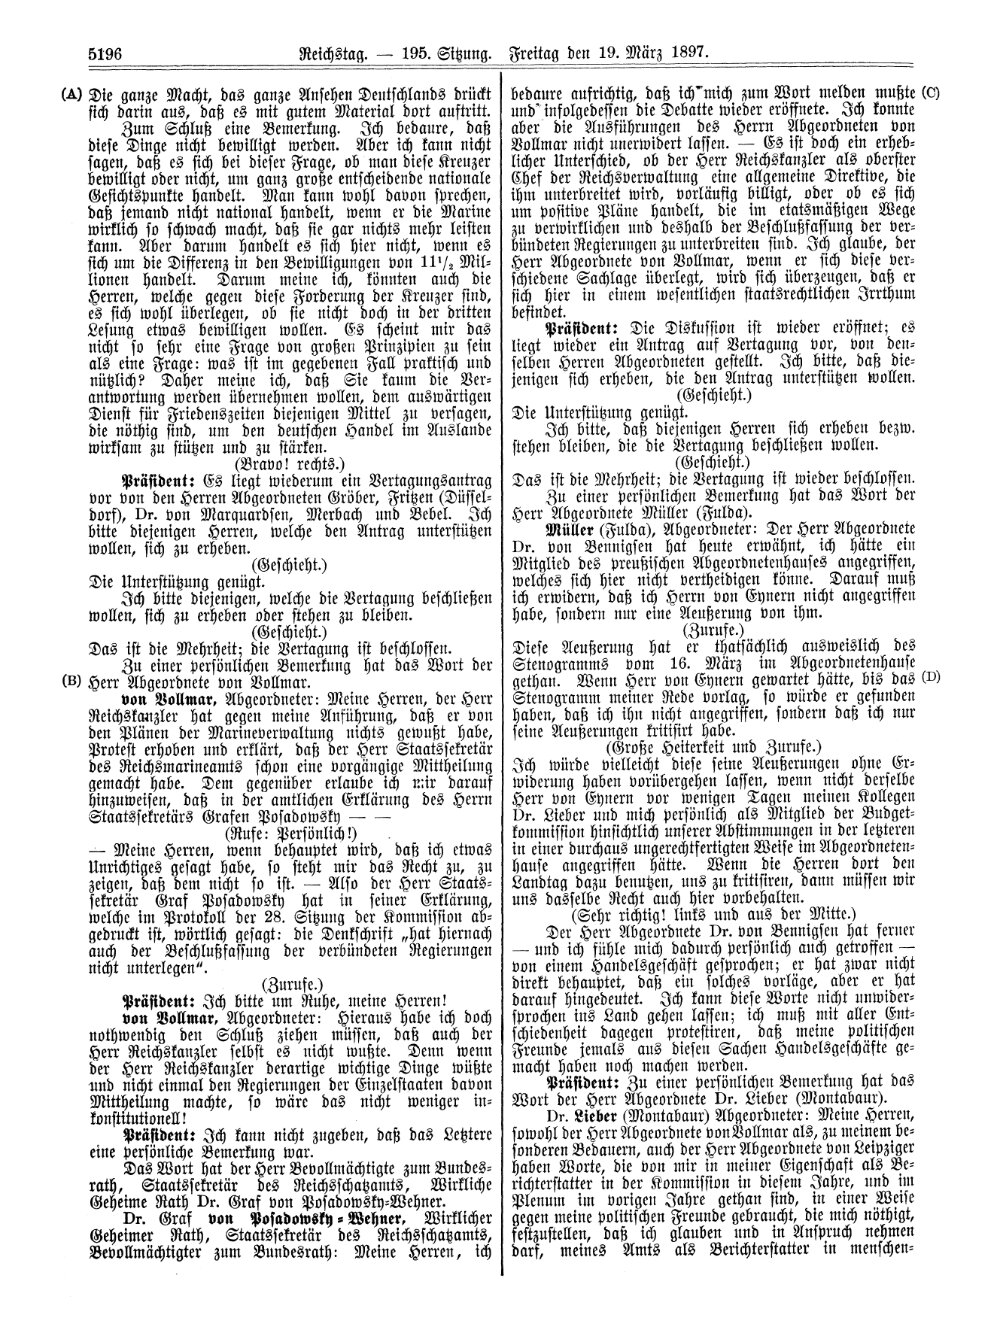 Scan of page 5196